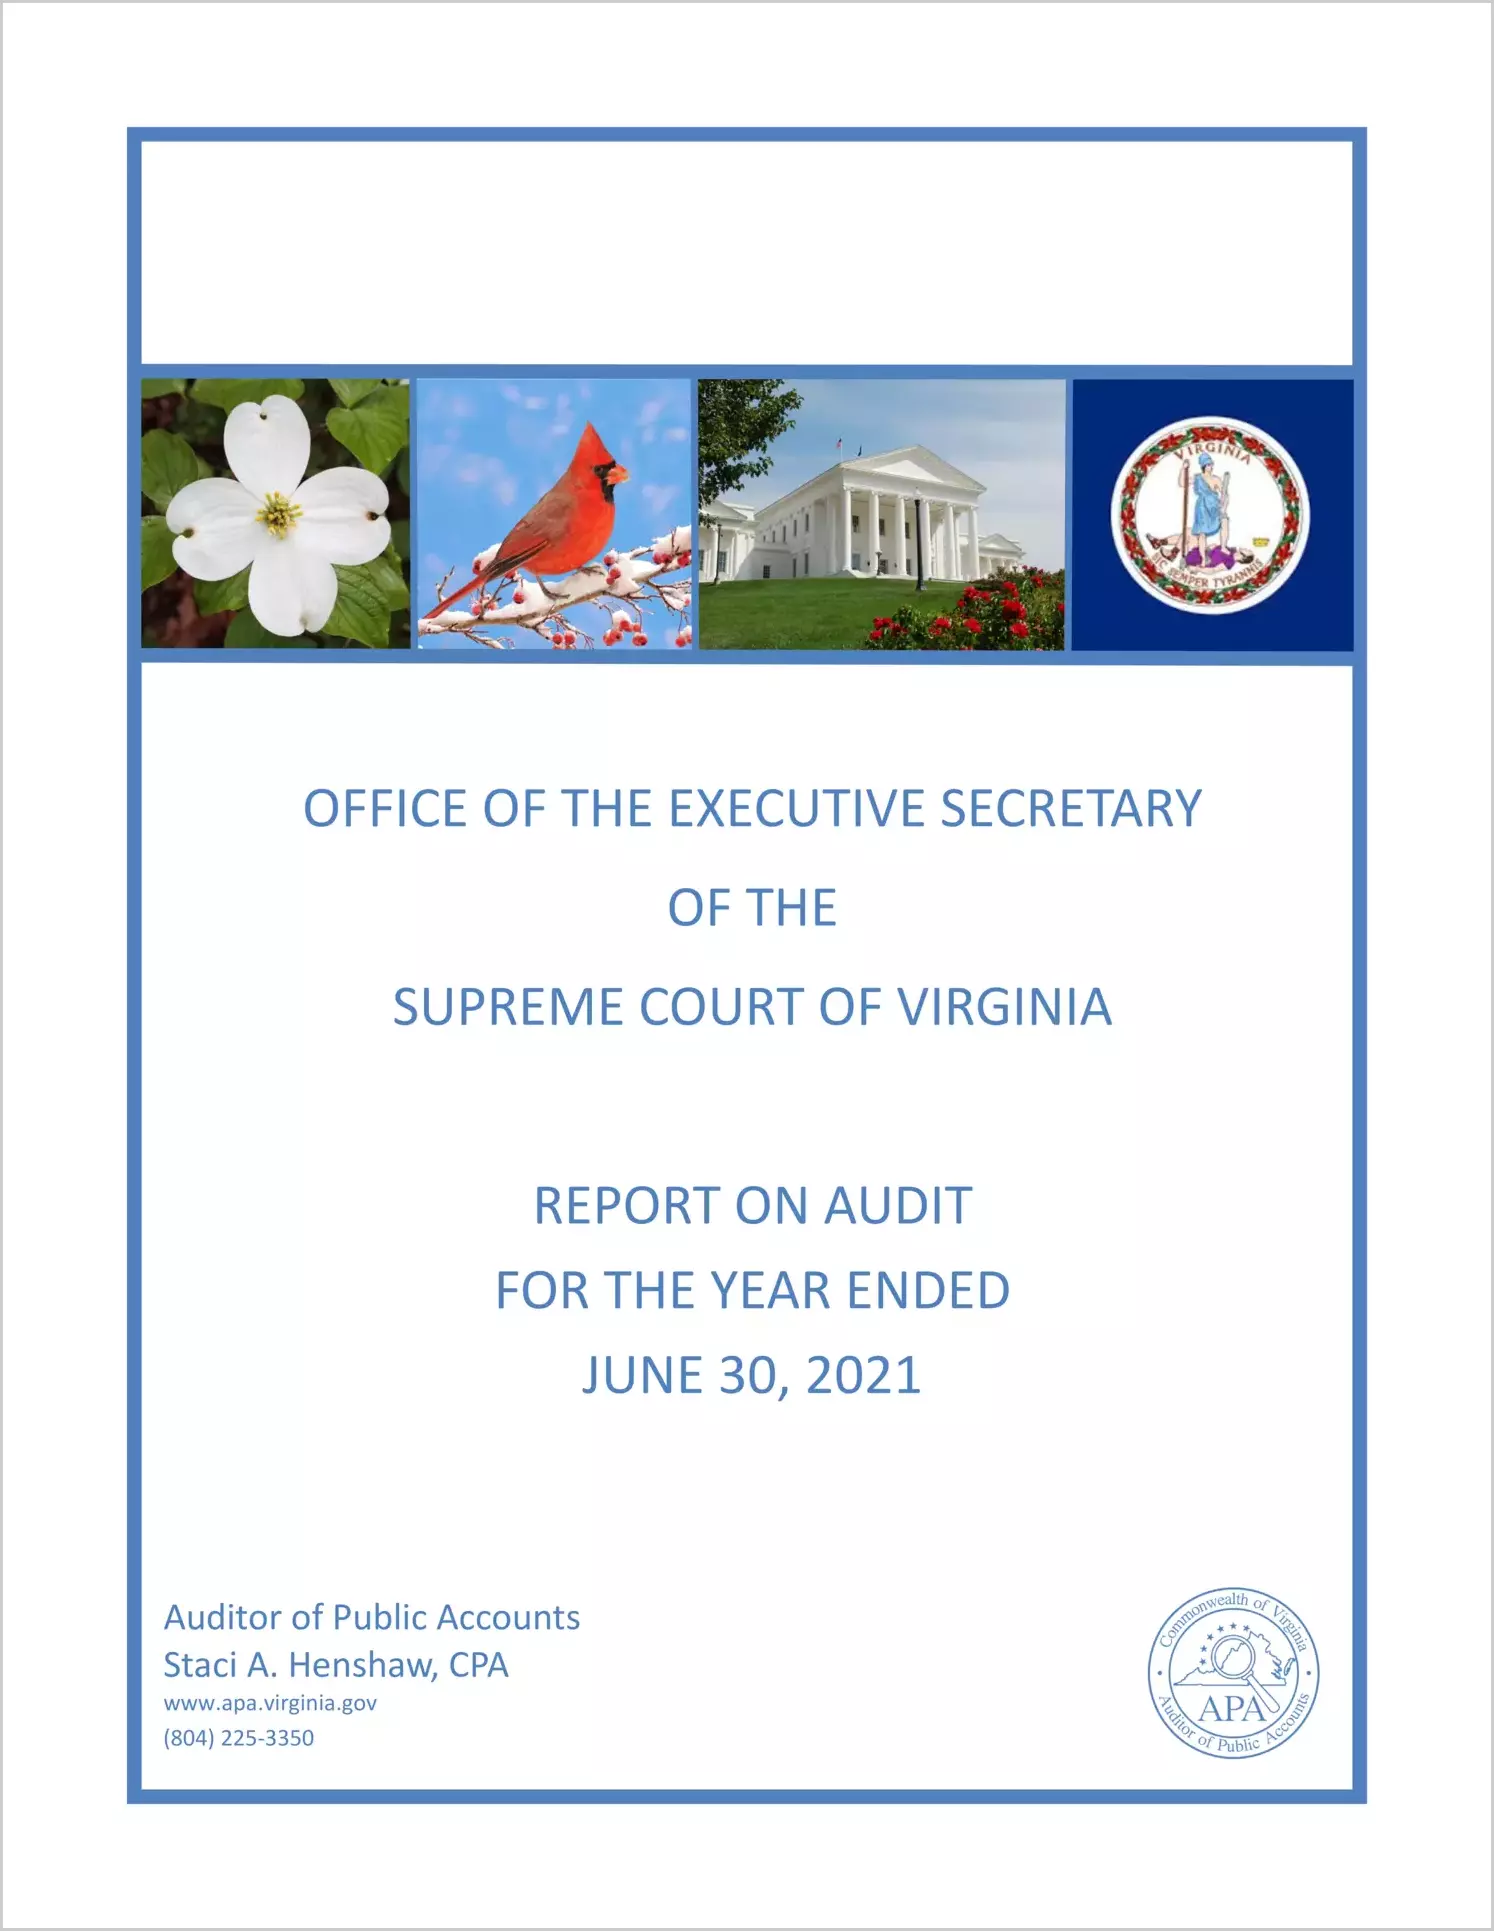 Office of the Executive Secretary of the Supreme Court of Virginia for the year ended June 30, 2021